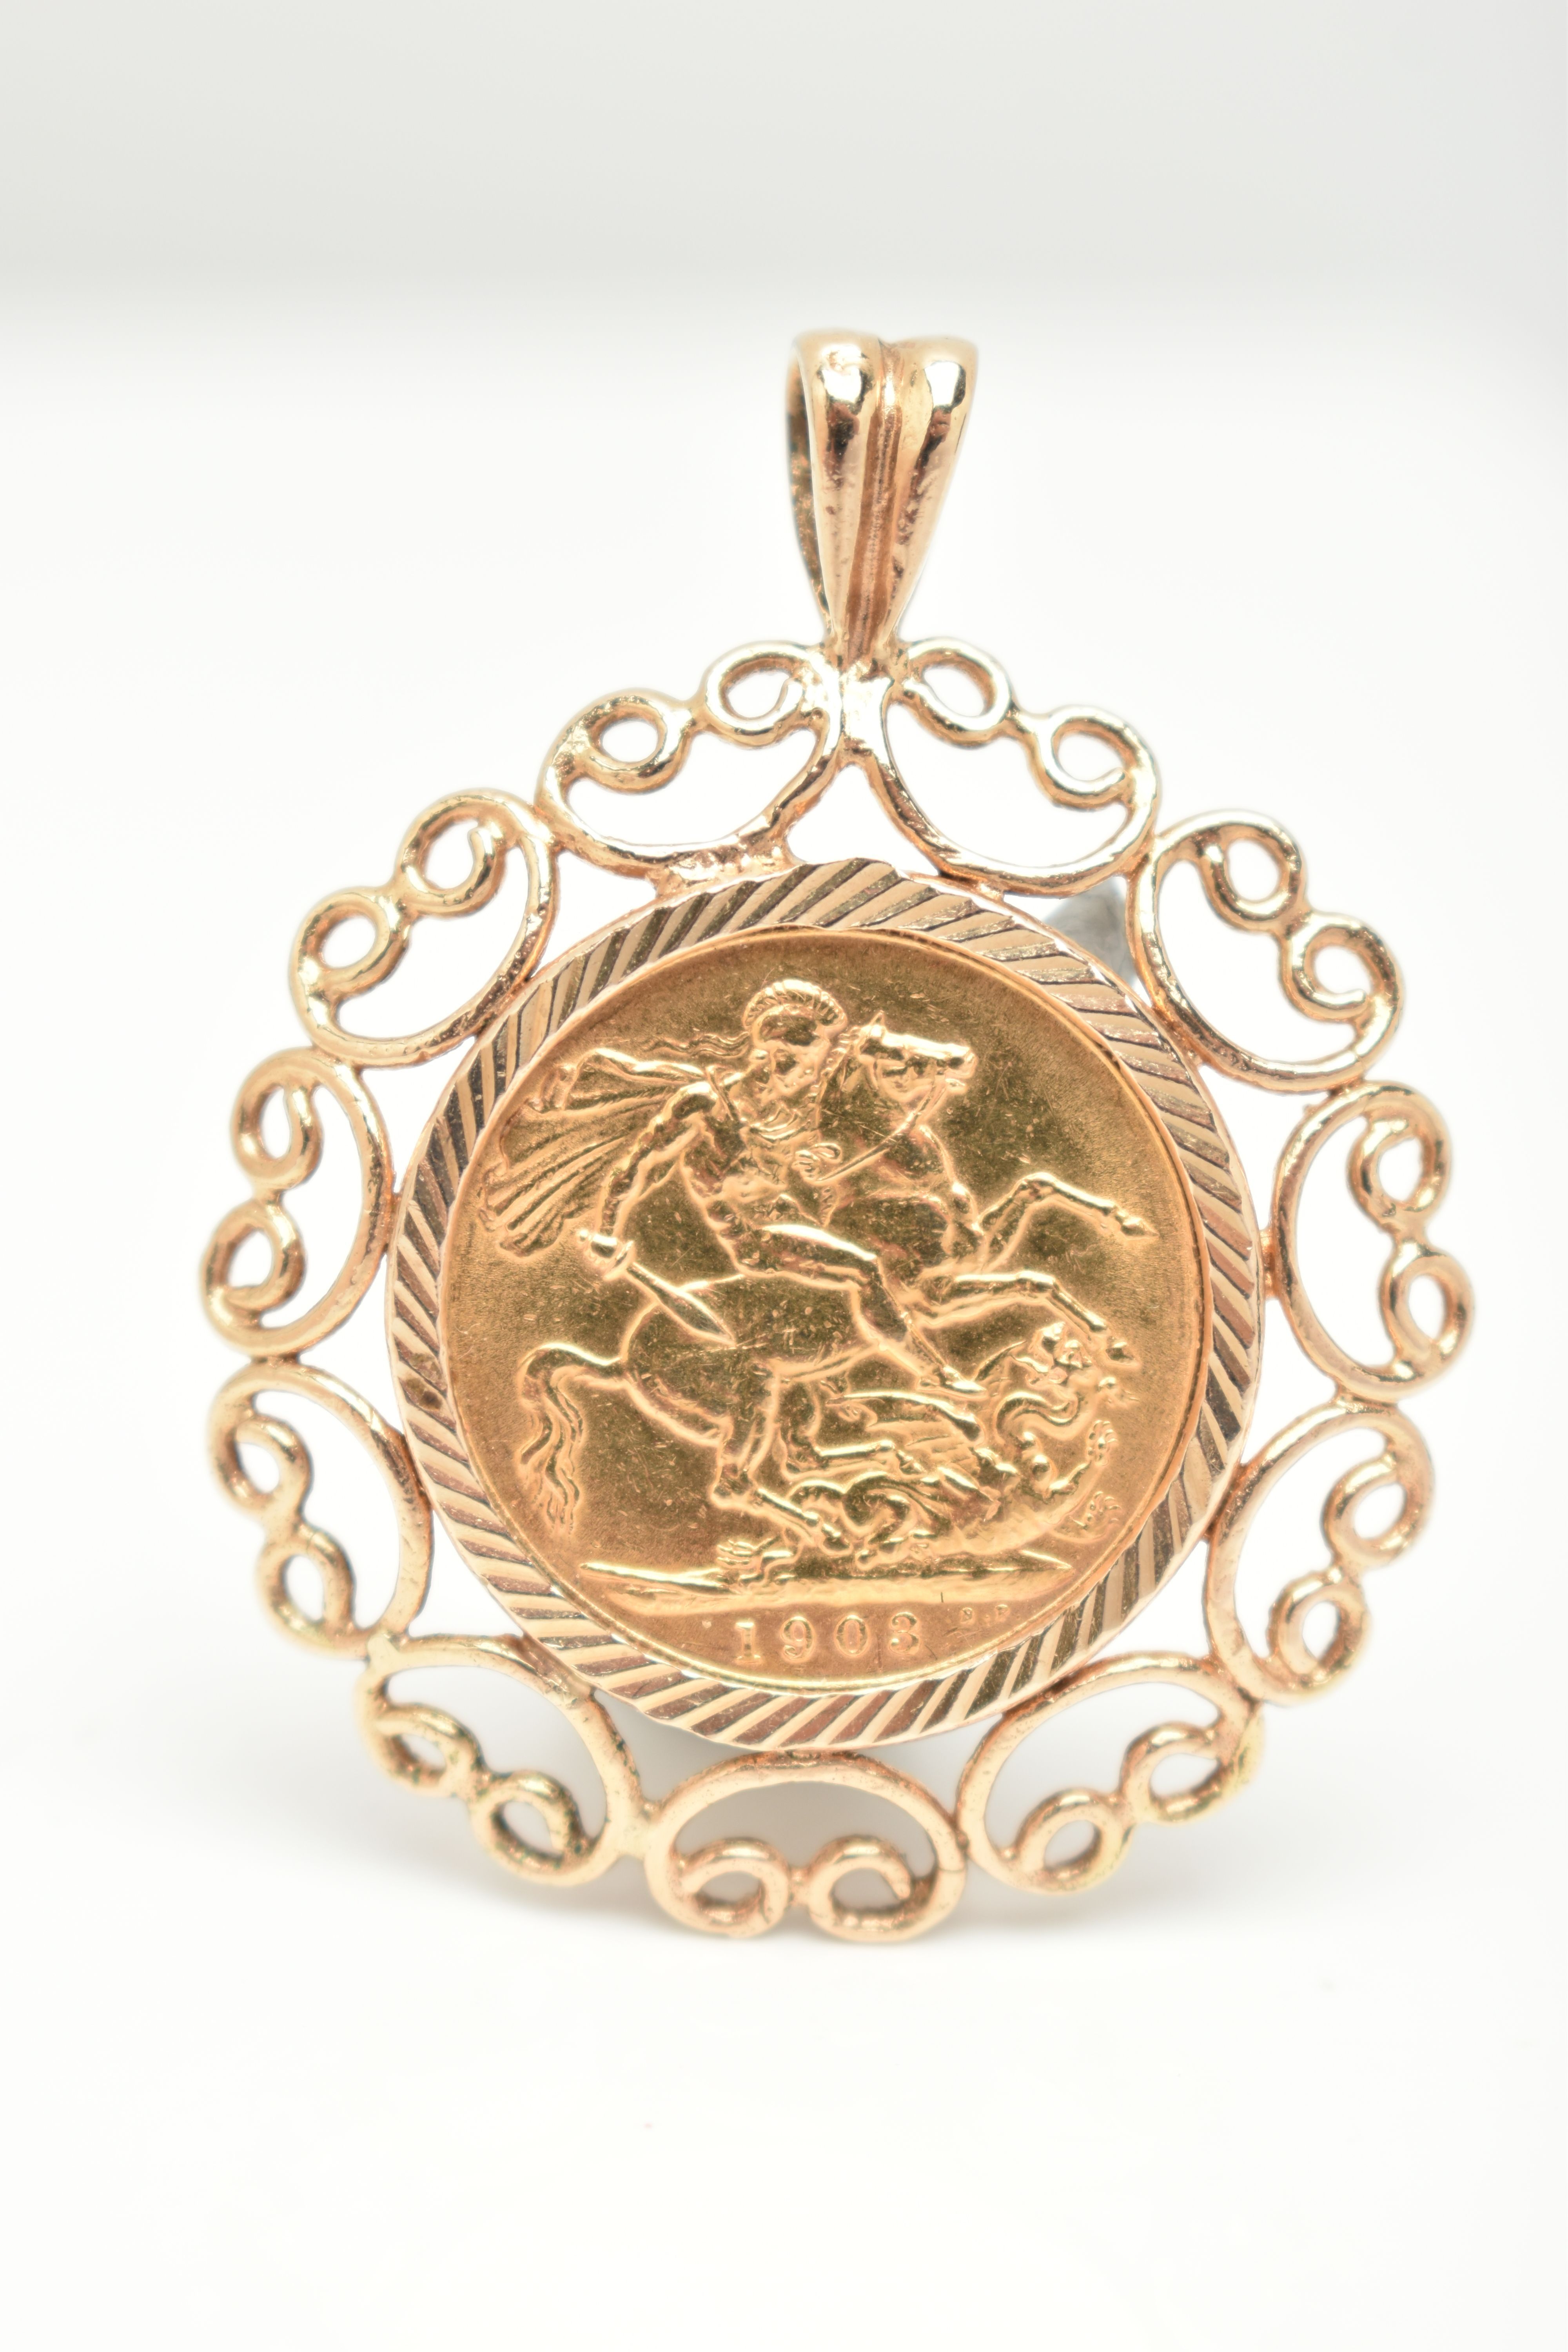 A MOUNTED FULL SOVEREIGN COIN PENDANT, Edward VII sovereign dated 1903, textured collet setting